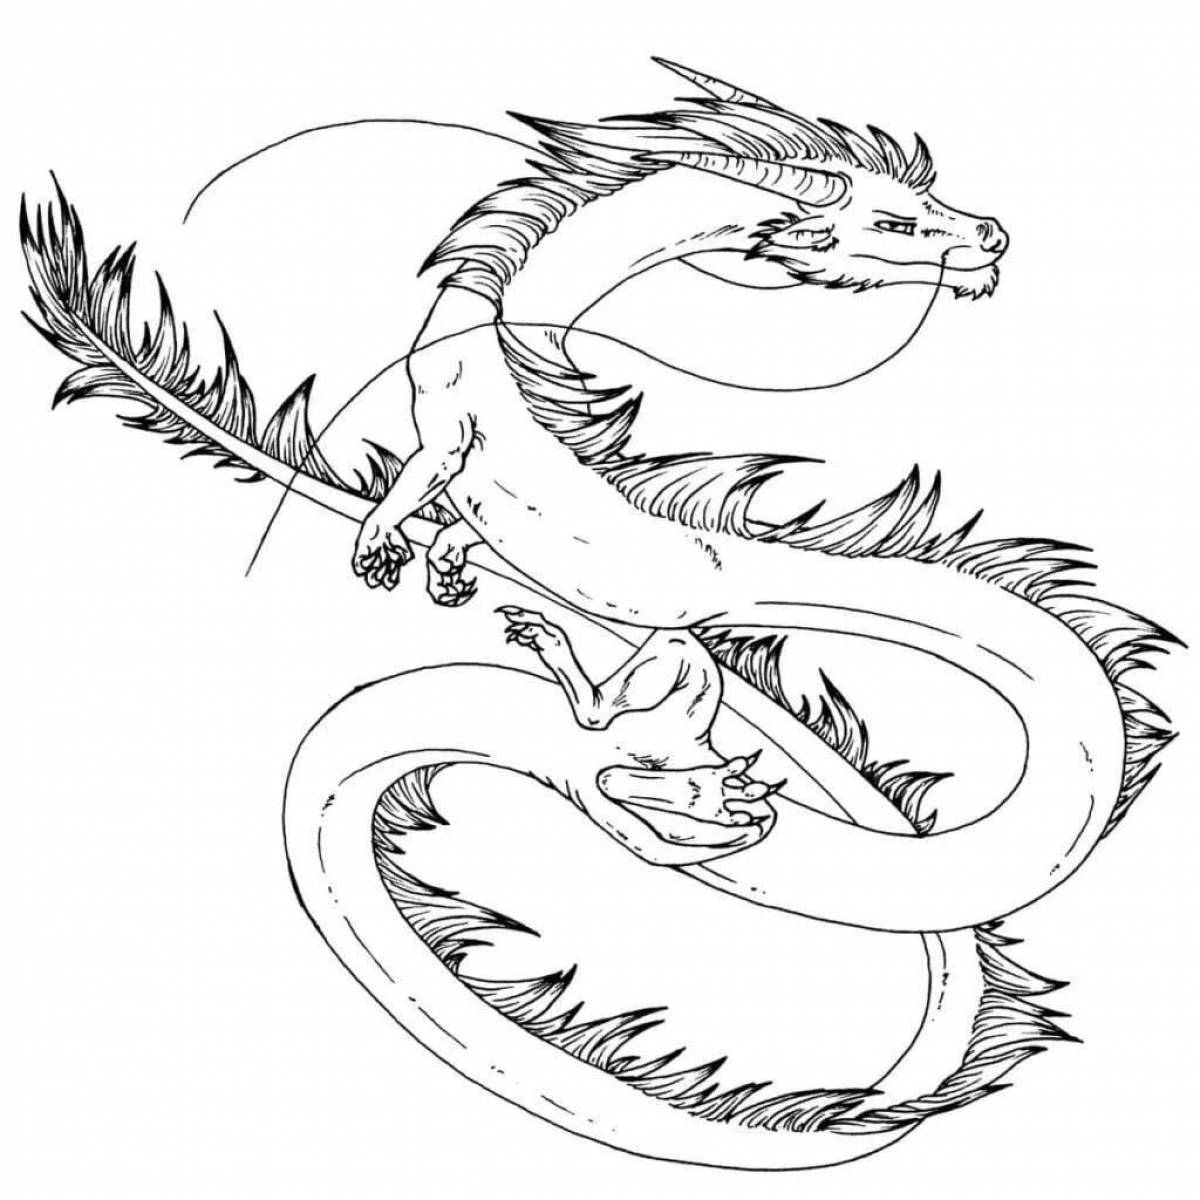 Exquisite water dragon coloring book